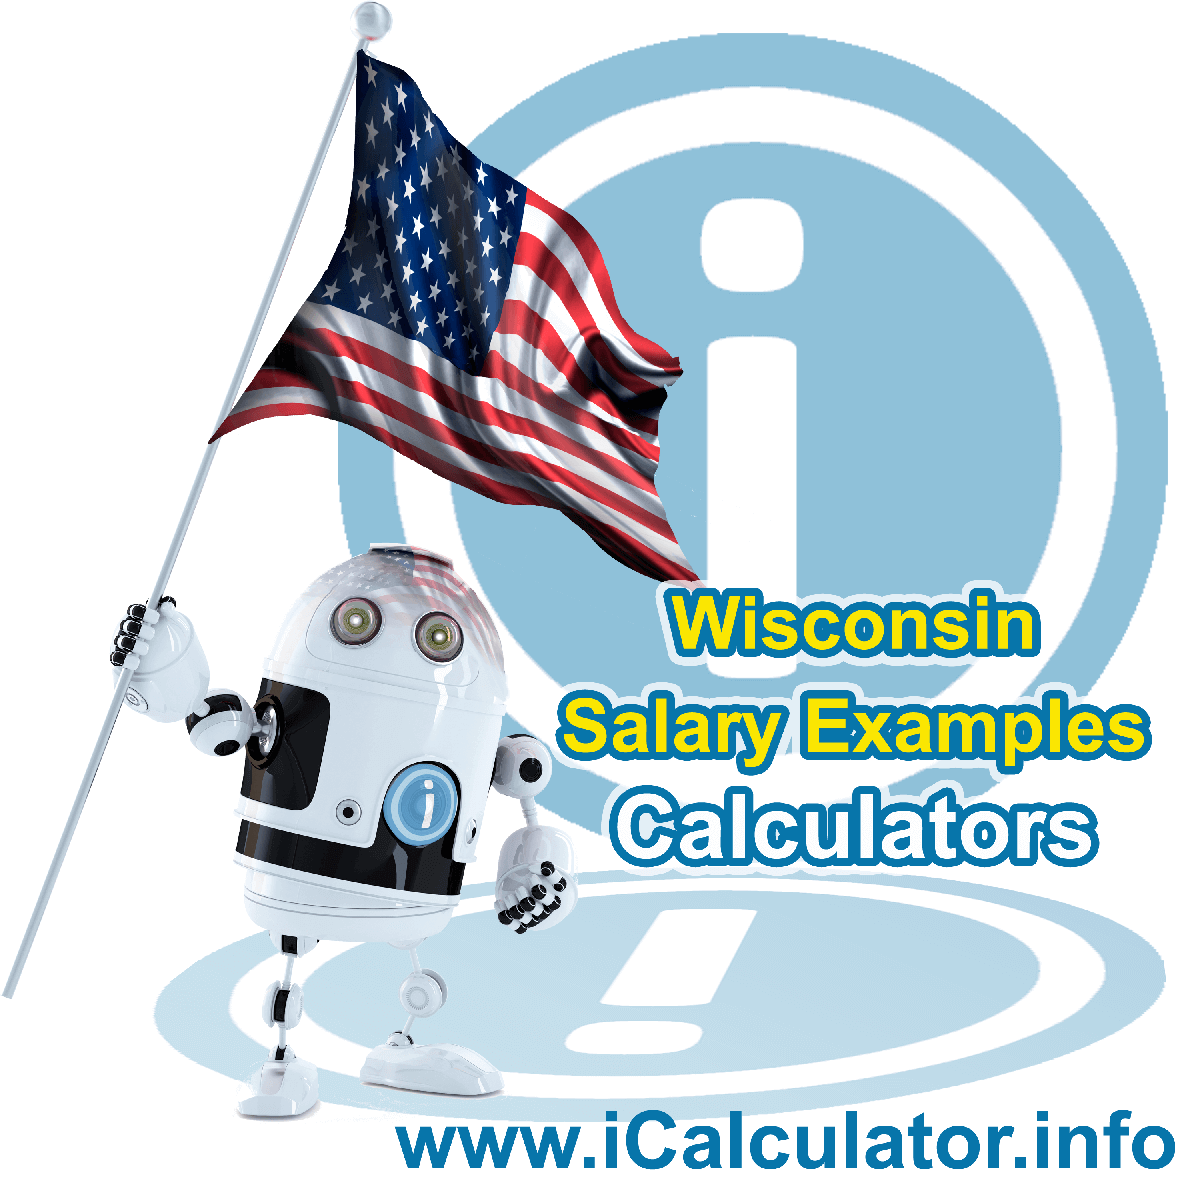 Wisconsin Salary Example for $ 60,000.00 in 2023 | iCalculator™ | $ 60,000.00 salary example for employee and employer paying Wisconsin State tincome taxes. Detailed salary after tax calculation including Wisconsin State Tax, Federal State Tax, Medicare Deductions, Social Security, Capital Gains and other income tax and salary deductions complete with supporting Wisconsin state tax tables 